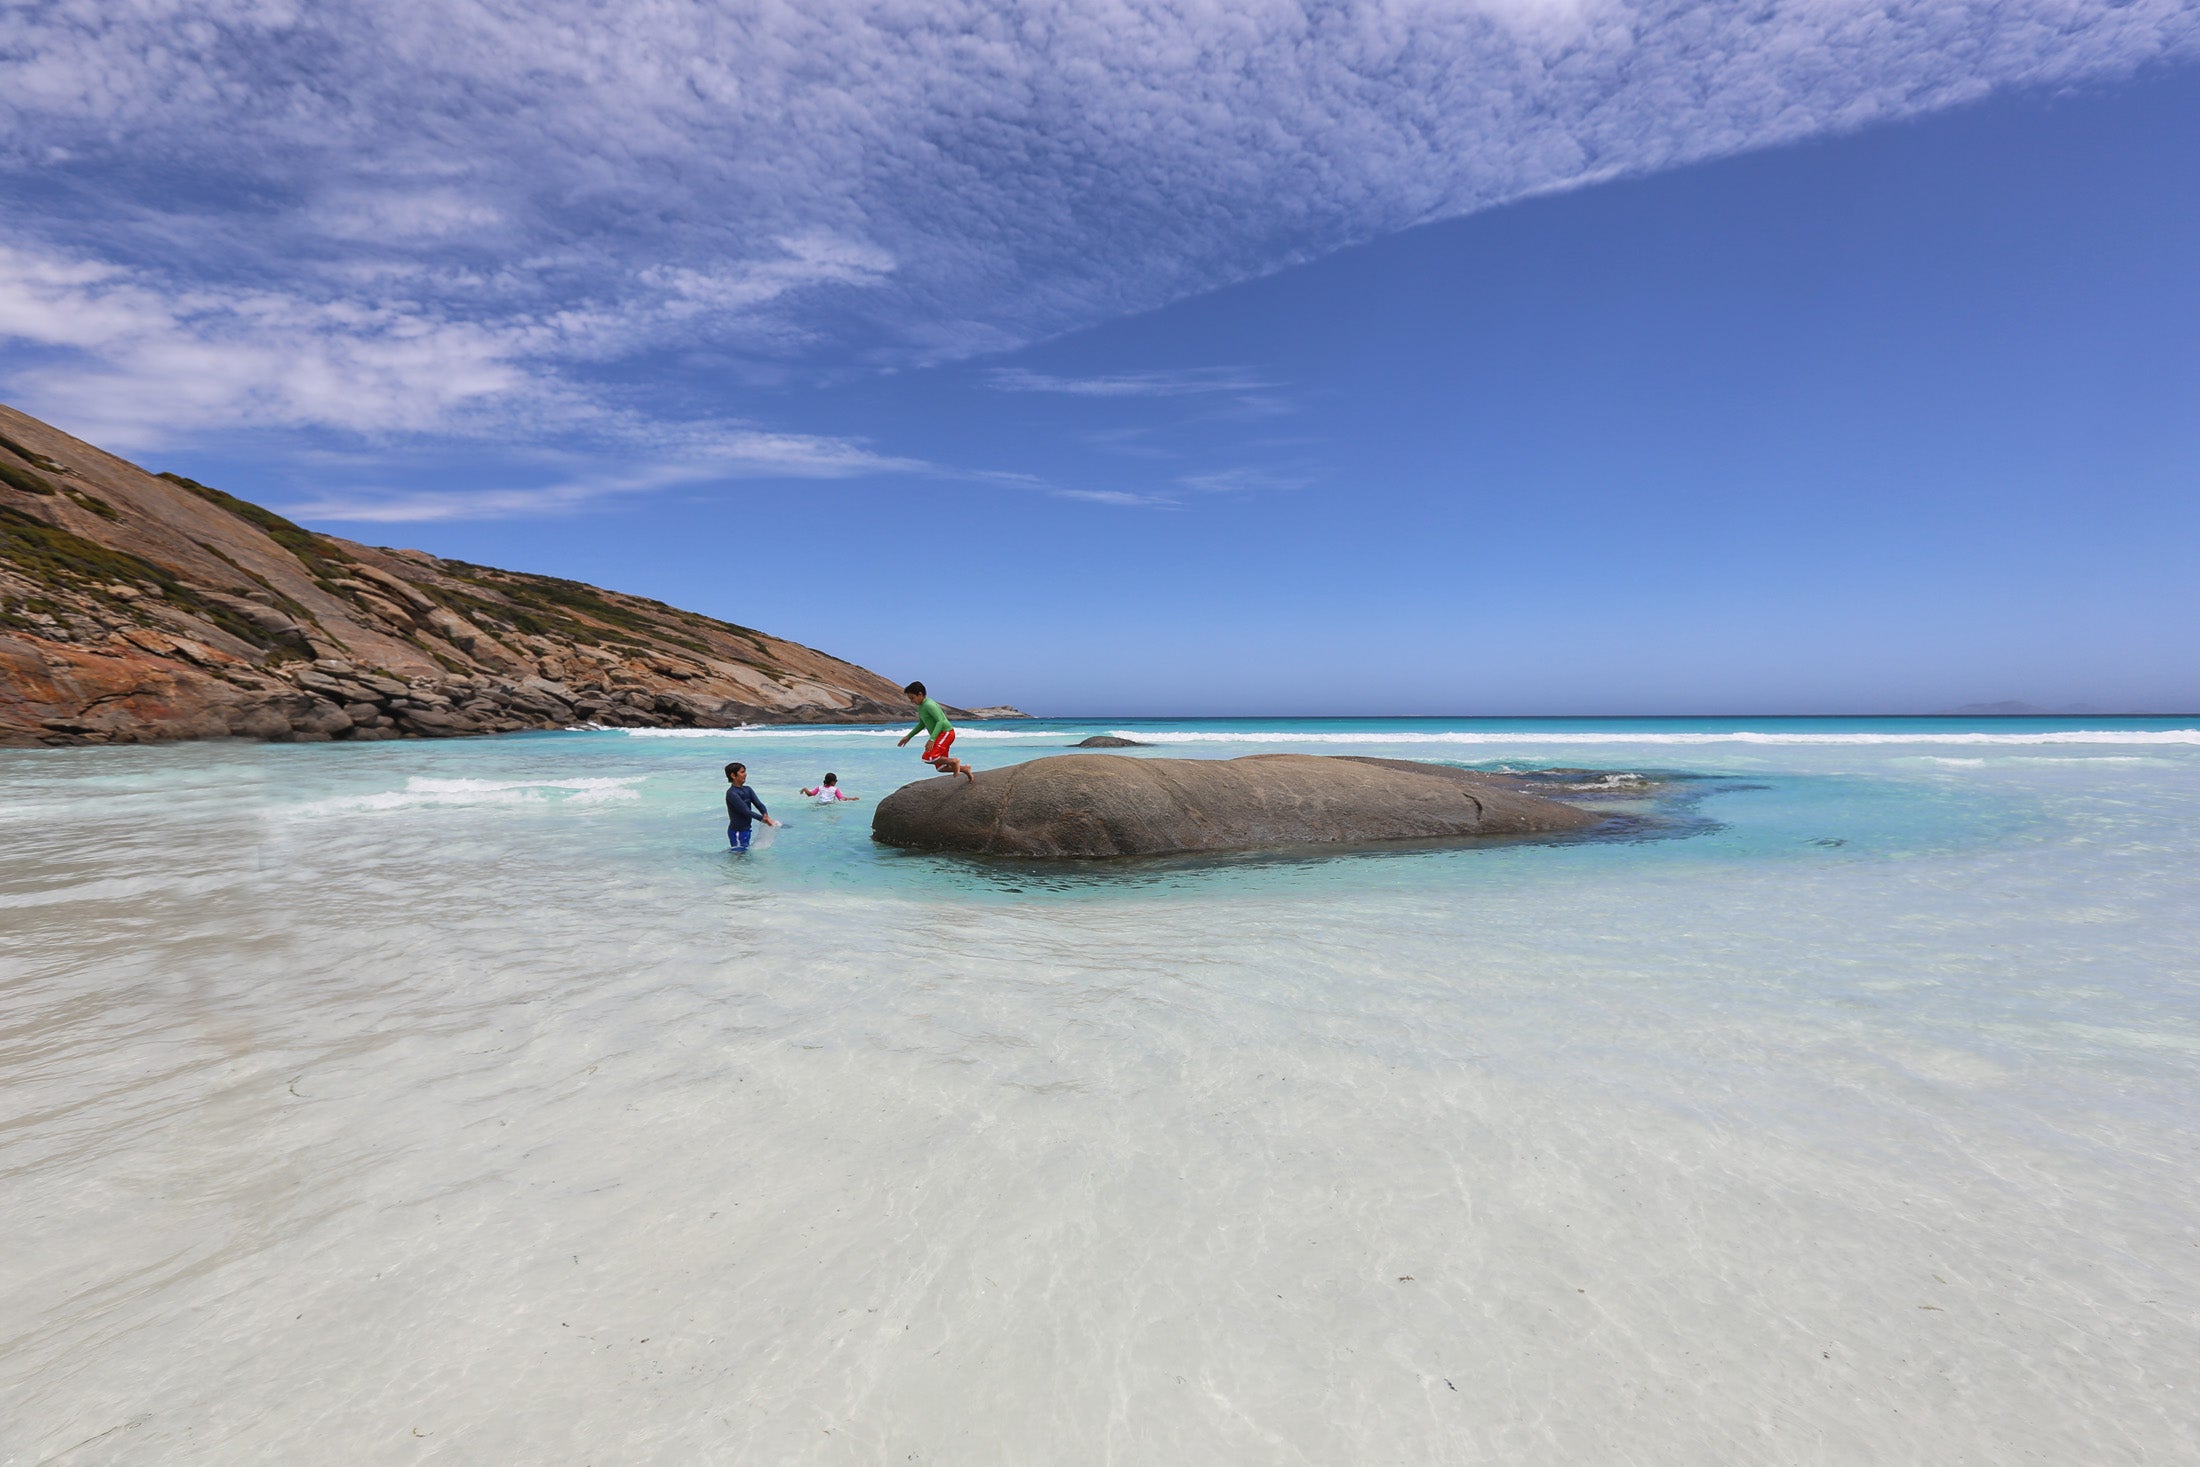 blue waters and a rock for kids to jump off - Esperance beaches at its best